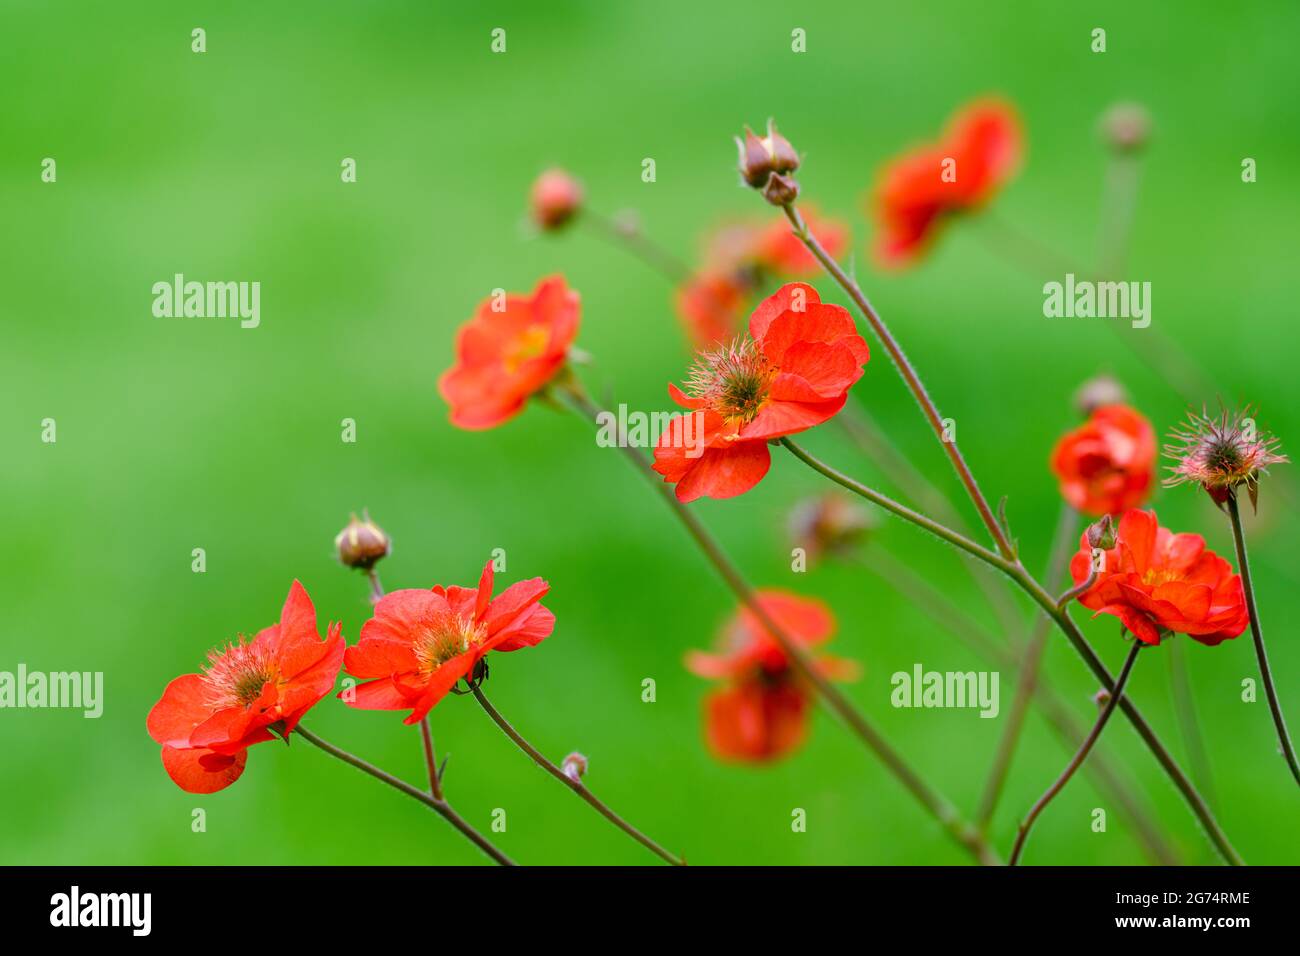 A small clump of red Geum flowers photographed against an out of focus green foliage background Stock Photo